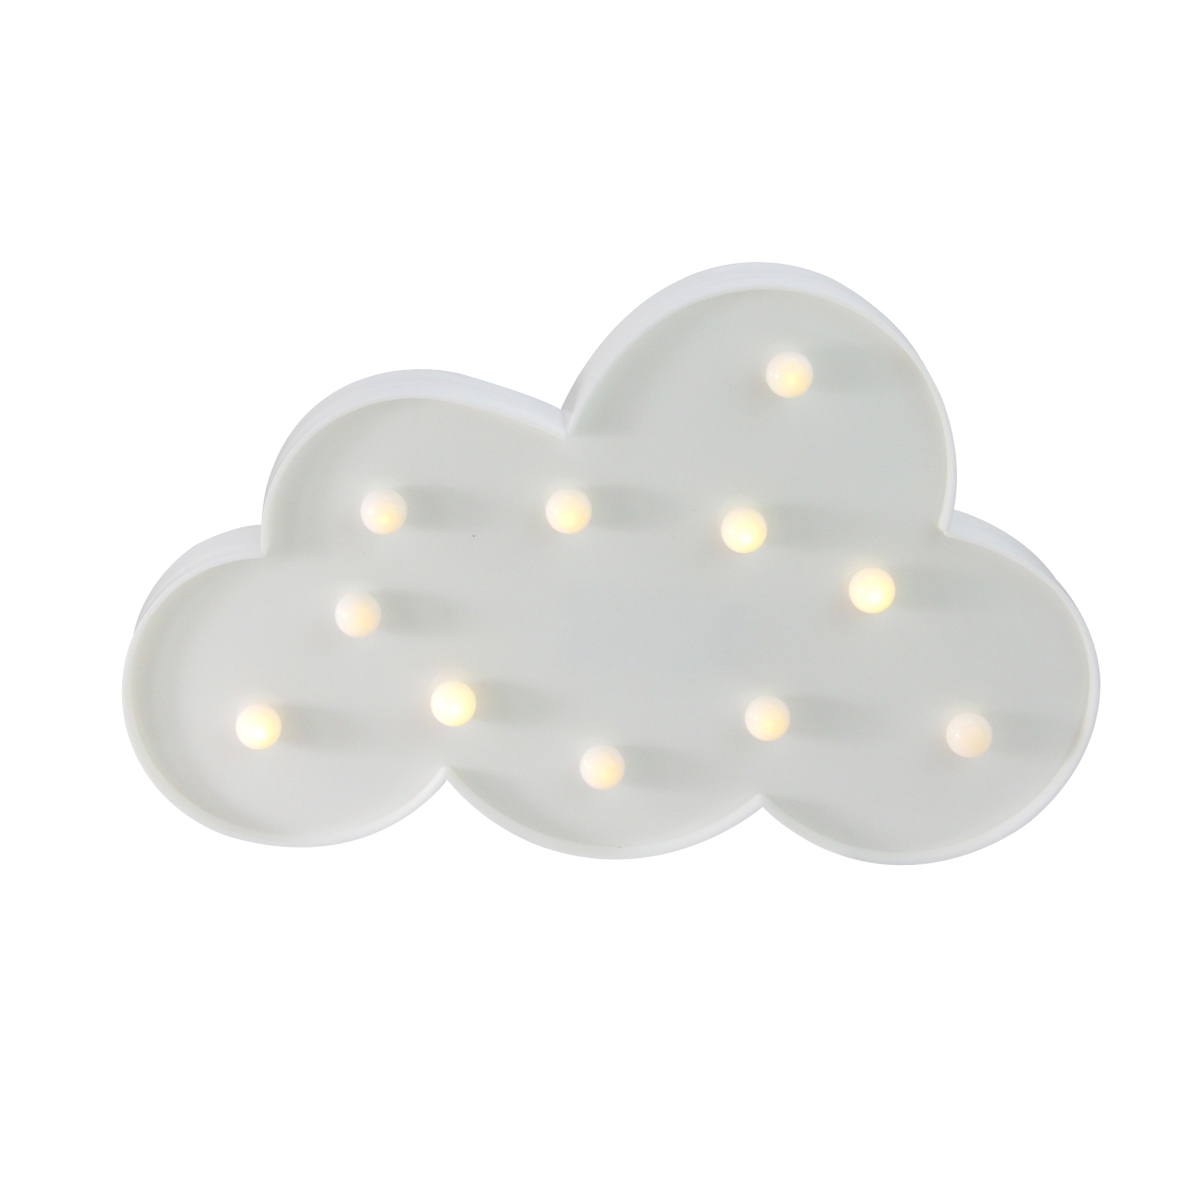 33377737 11.5 In. Battery Operated Led Lighted White Cloud Marquee Sign